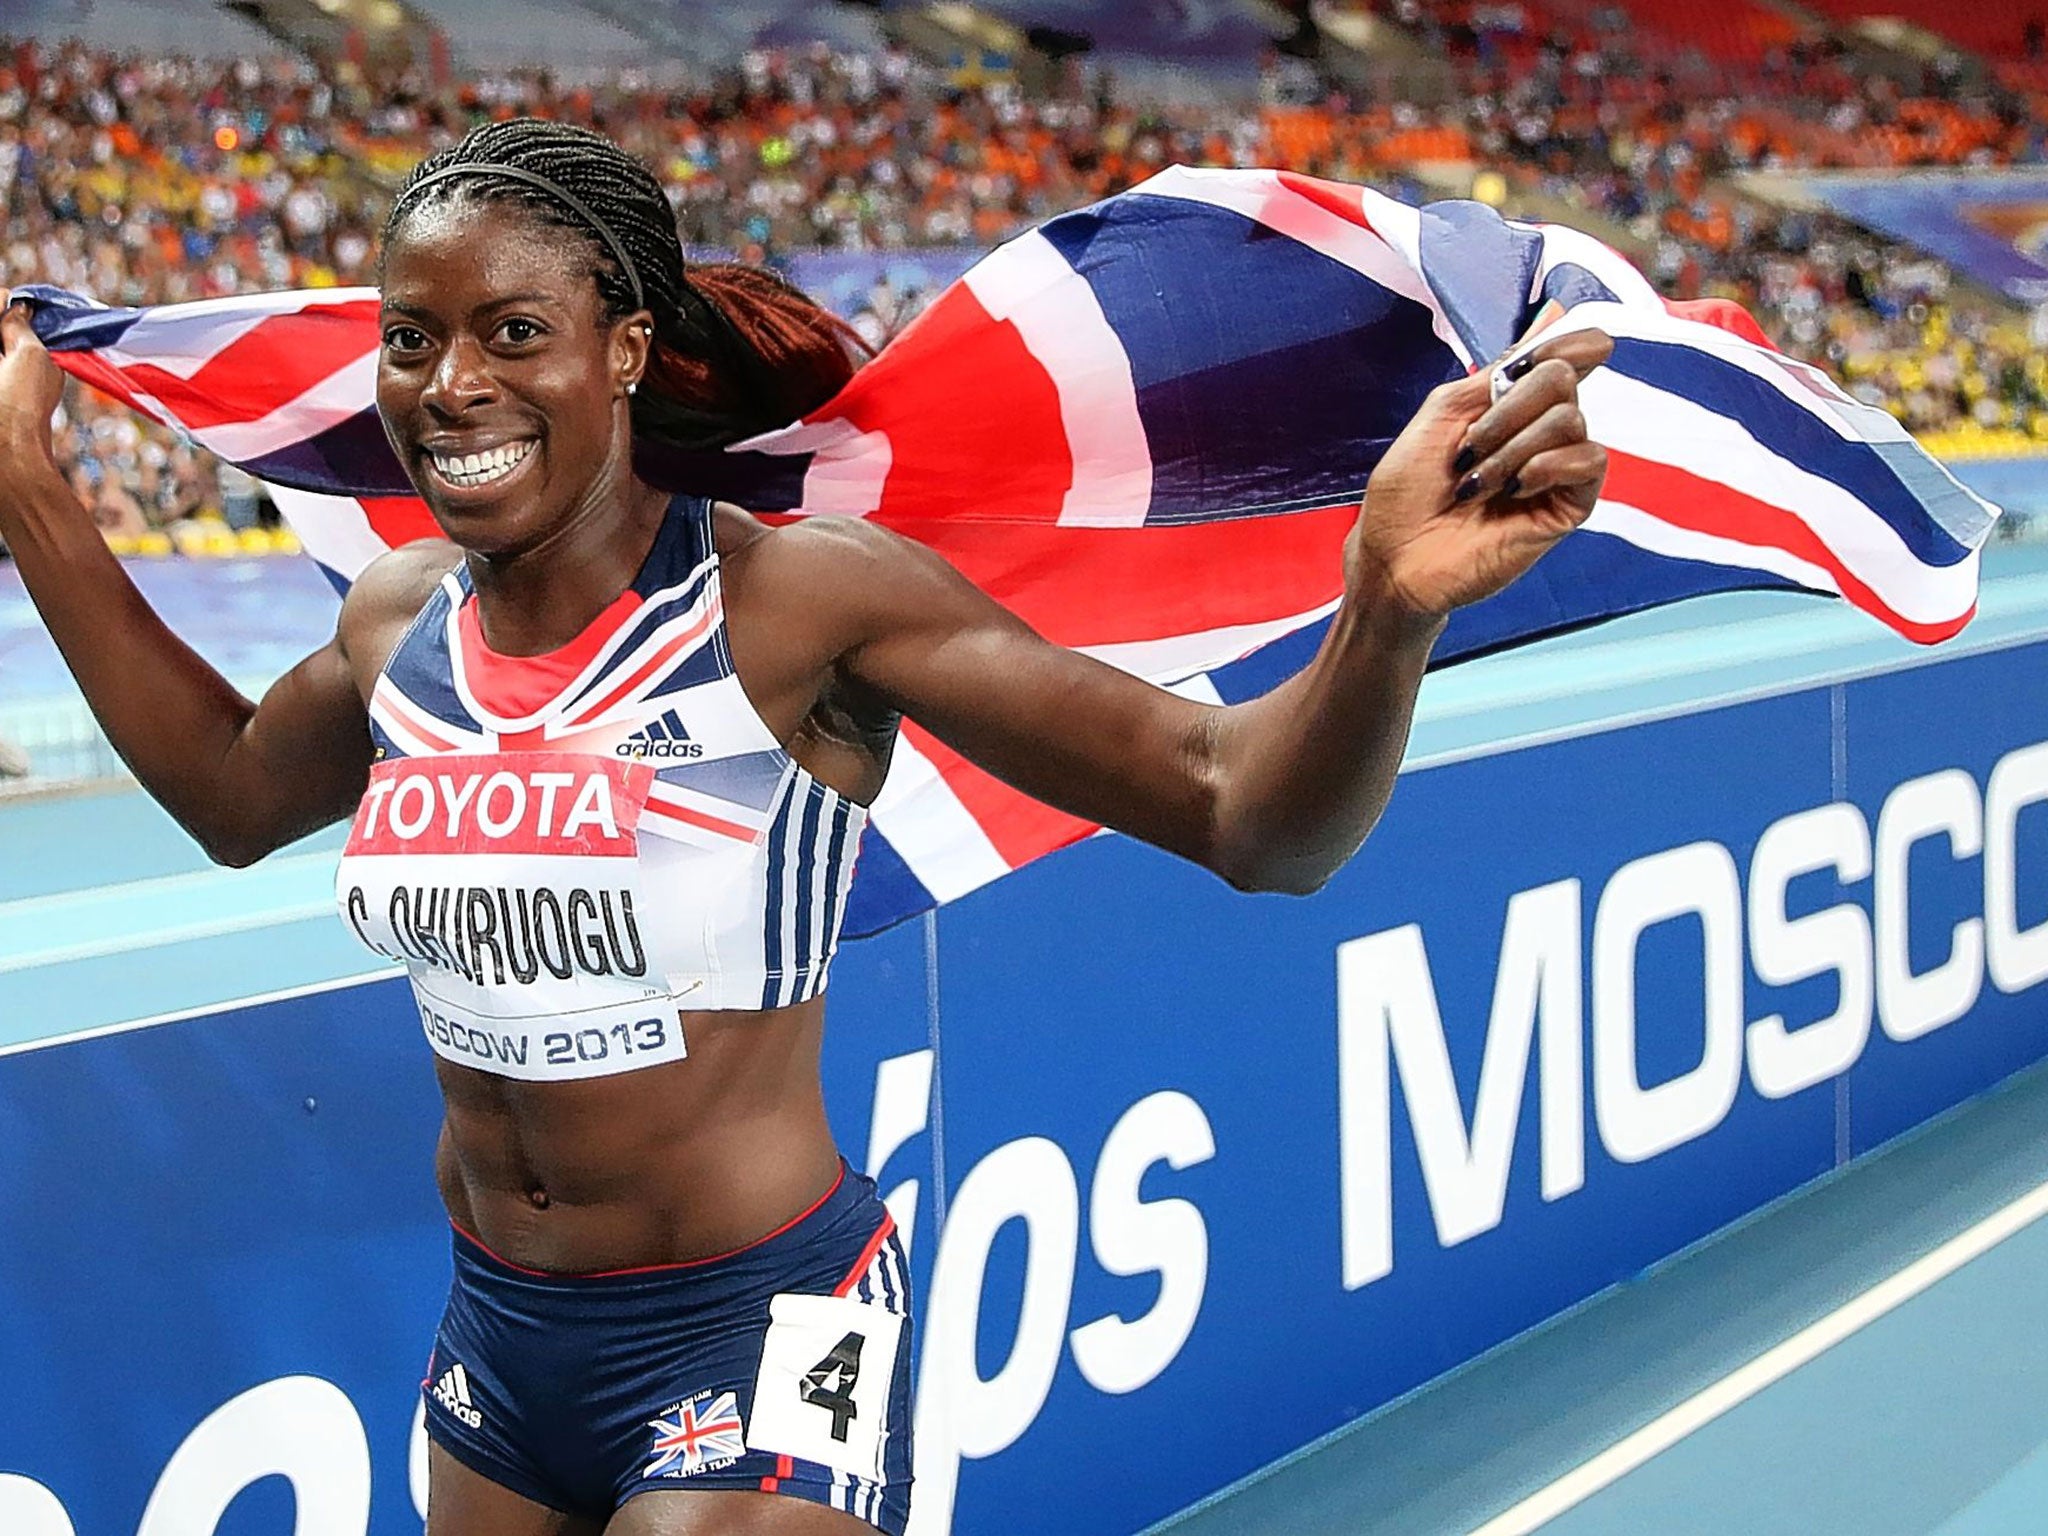 Christine Ohuruogu celebrates after winning the 400 metres final at last year’s World Championships in Moscow